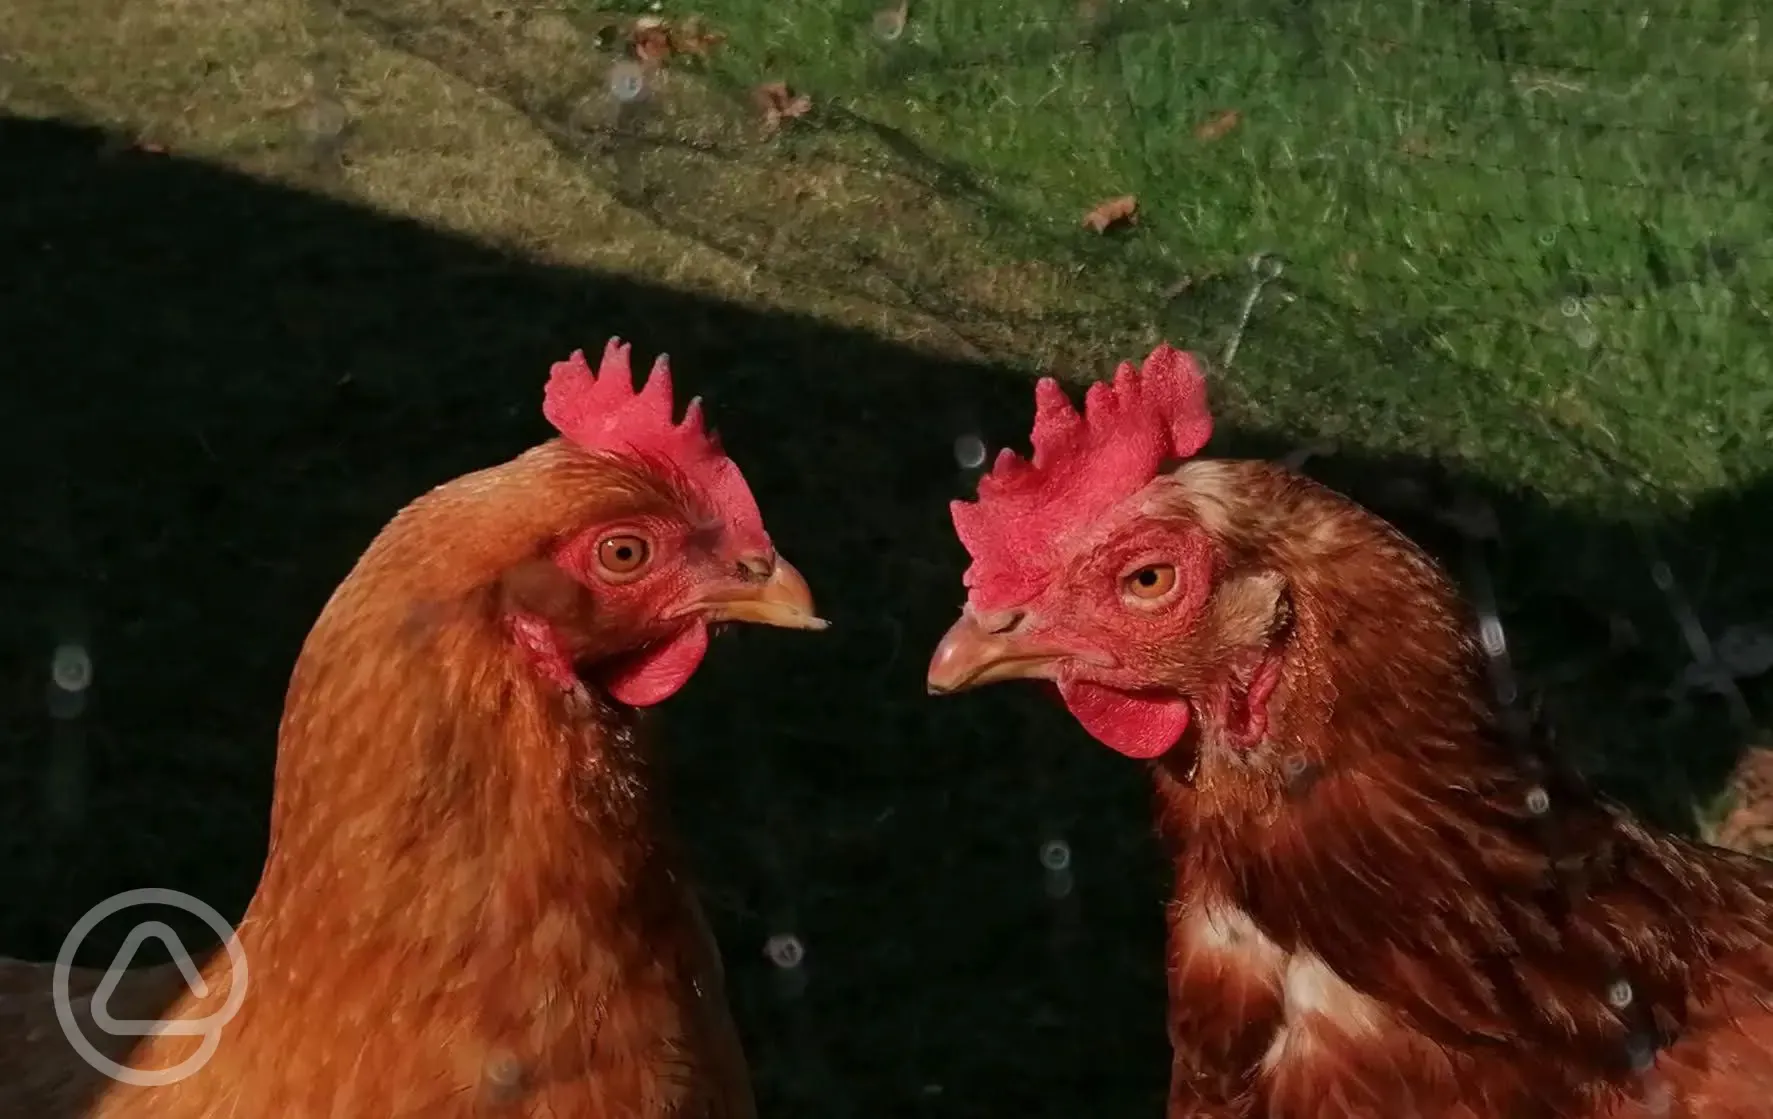 Meet our friendly chickens